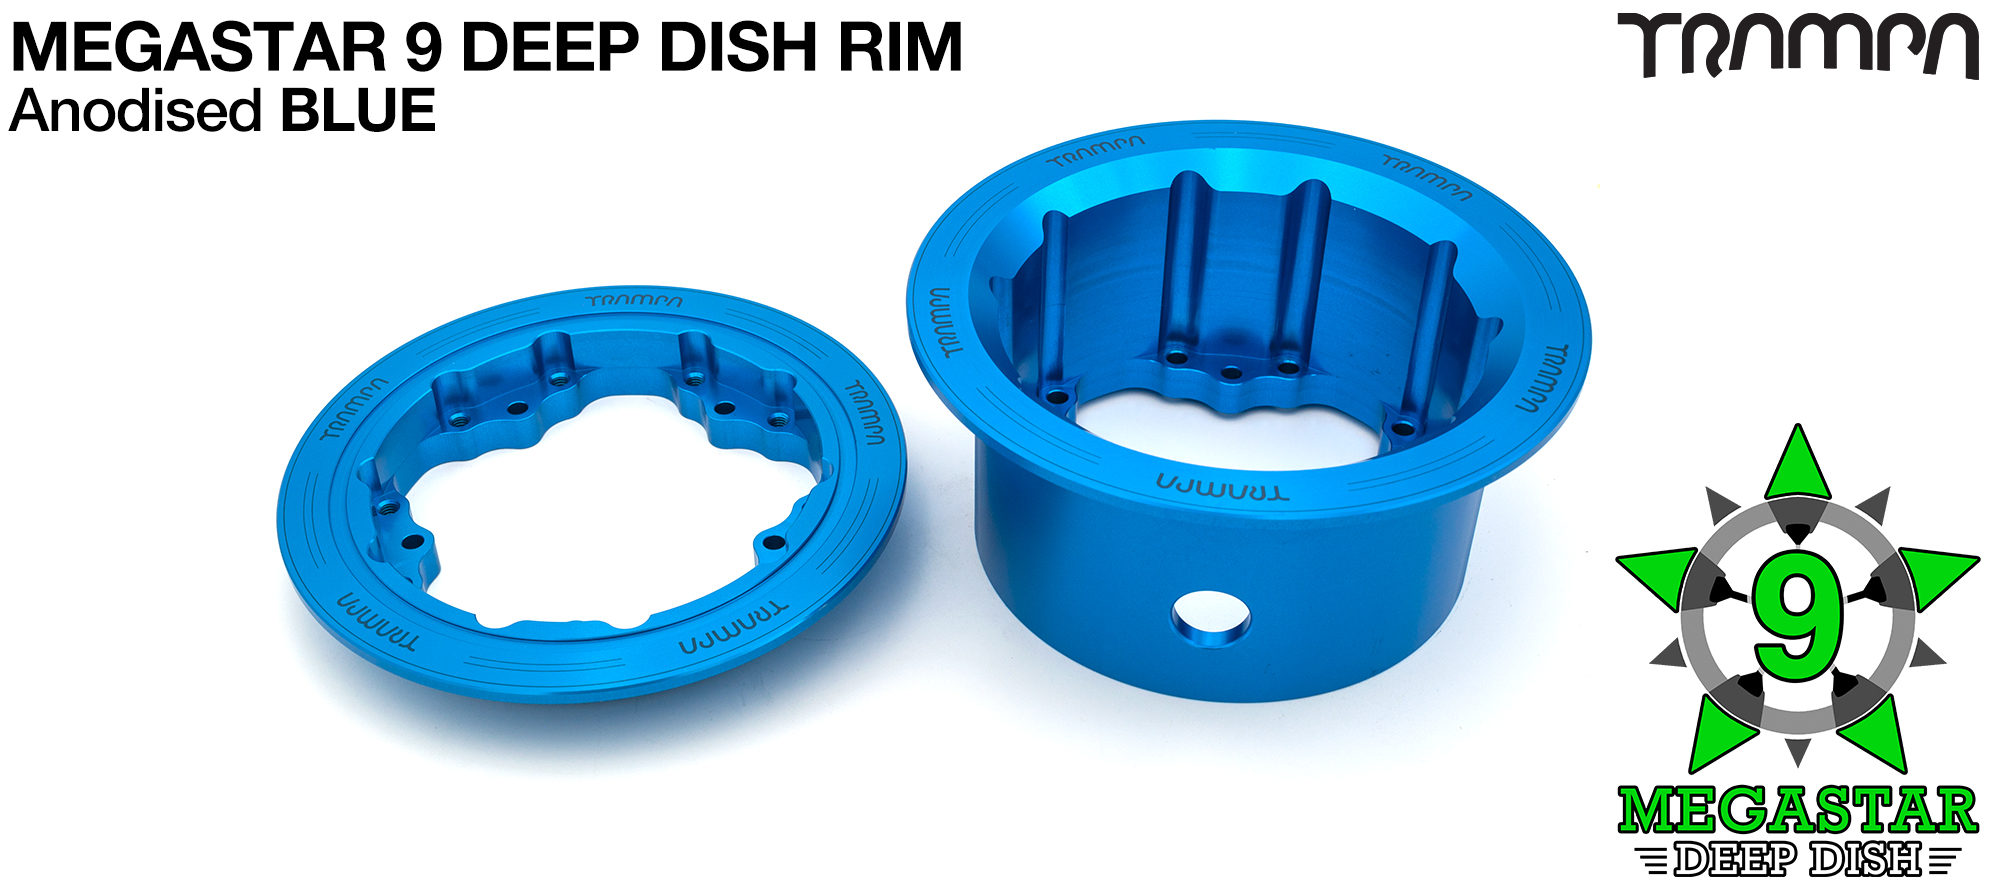 MEGASTAR 9 DEEP-DISH Rims Measure 3.75/4x 3 Inch. The Bearings are positioned OFF-SET & accept 4 Inch Rim Tyres to make 9 or 10 inch Wheels - BLUE